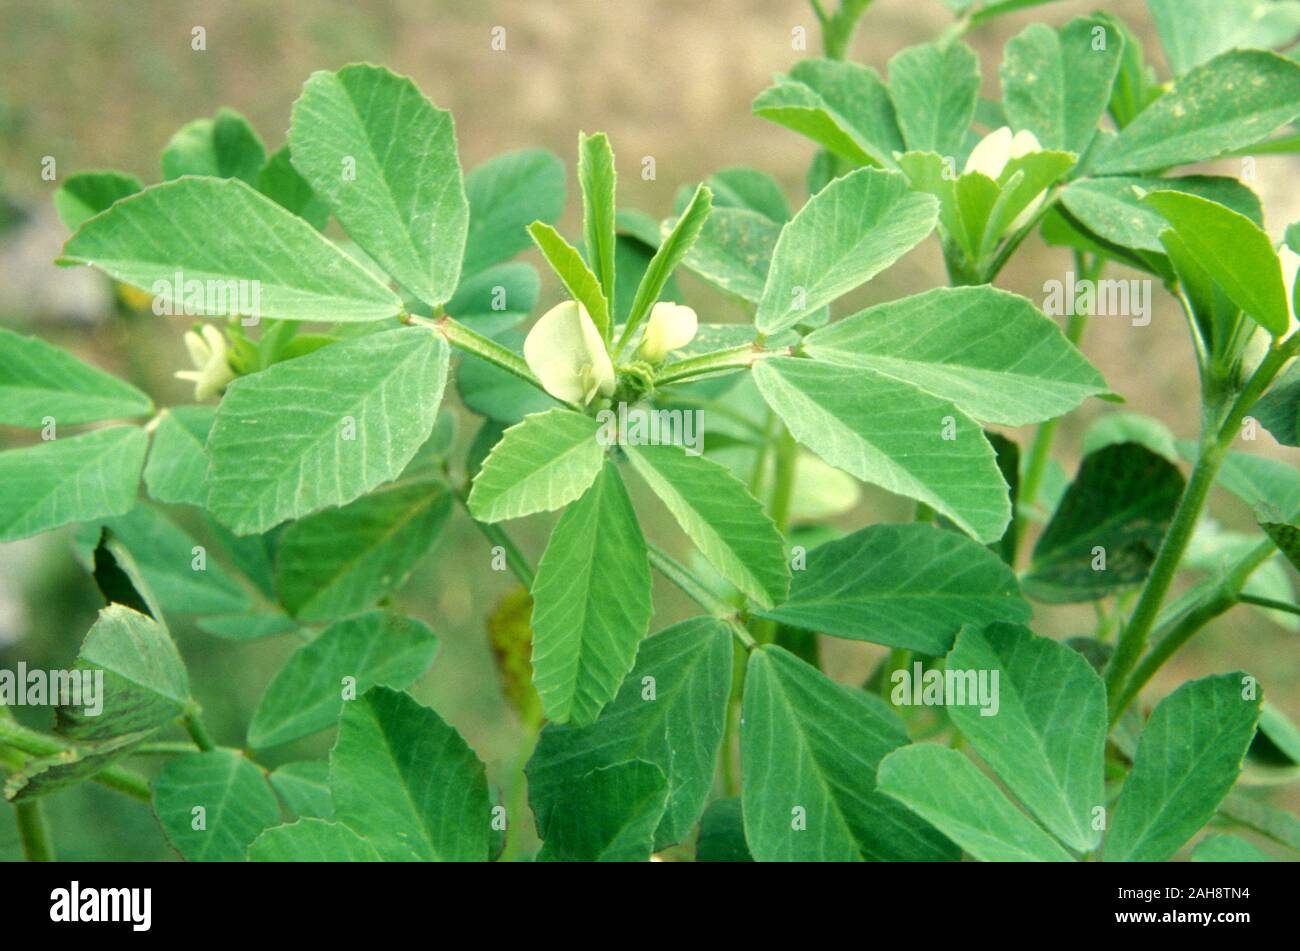 FENUGREEK GROWING (TRIGONELLA FOENUM-GRAECUM) IS CULTIVATED AS A WORLD WIDE SEMIARID CROP. USED AS COMMON INGREDIENT IN DISHES FROM INDIA.. Stock Photo